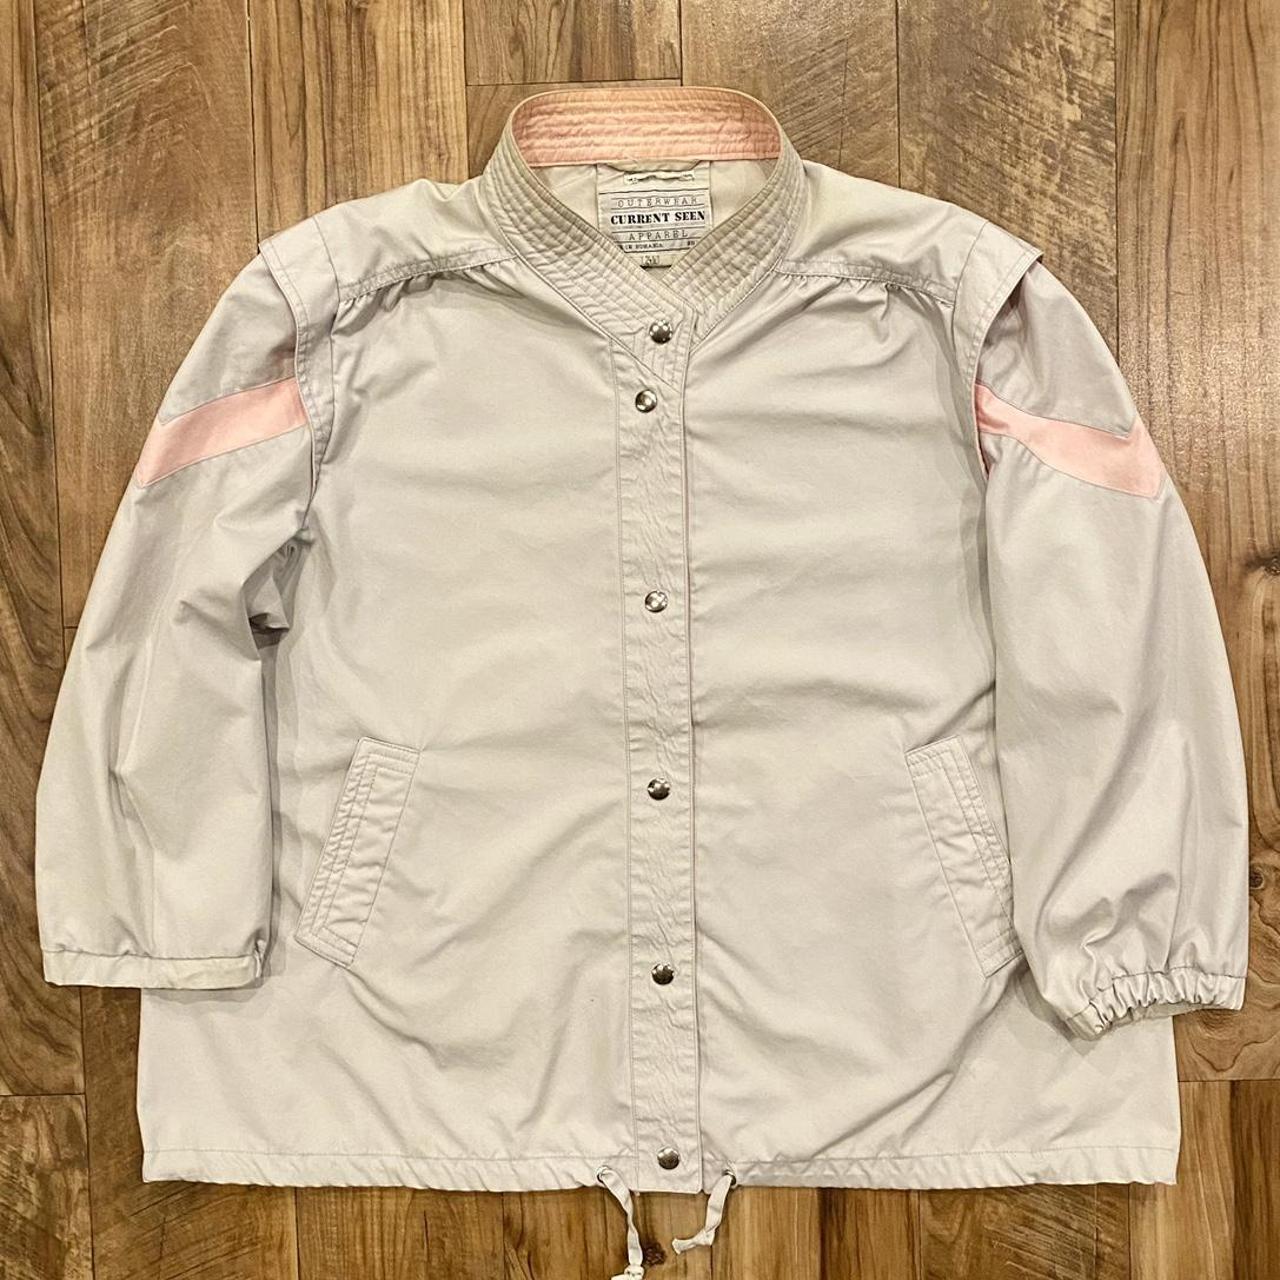 Current Seen Women's Grey and Pink Jacket